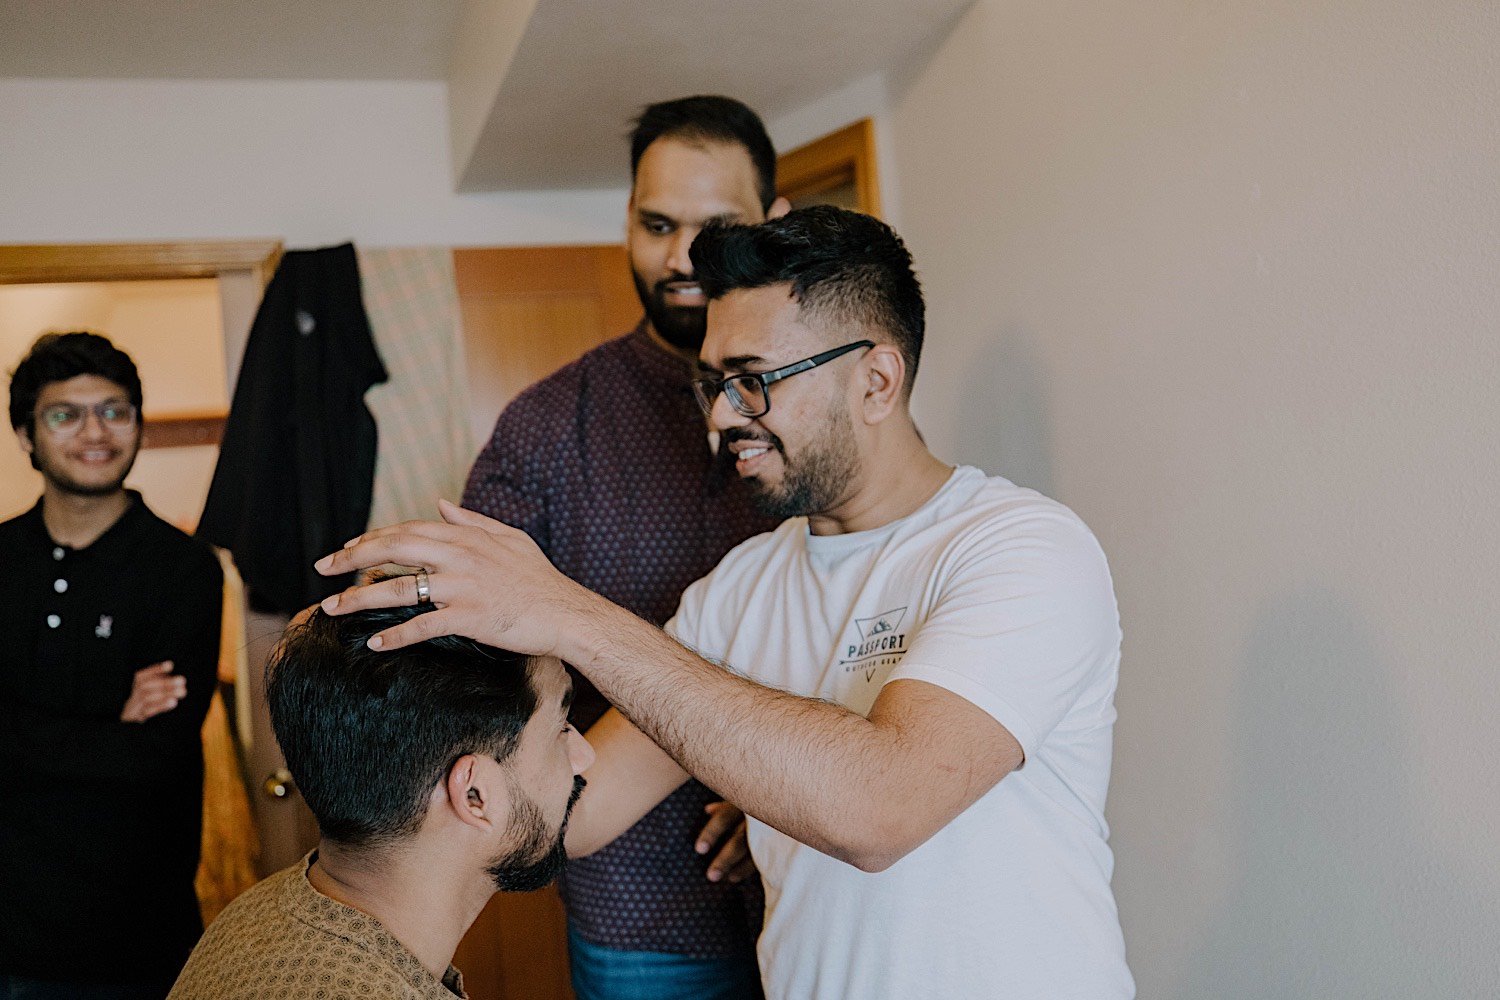 Man fixes grooms hair as they are getting ready for his wedding day with his two other friends smiling in the background